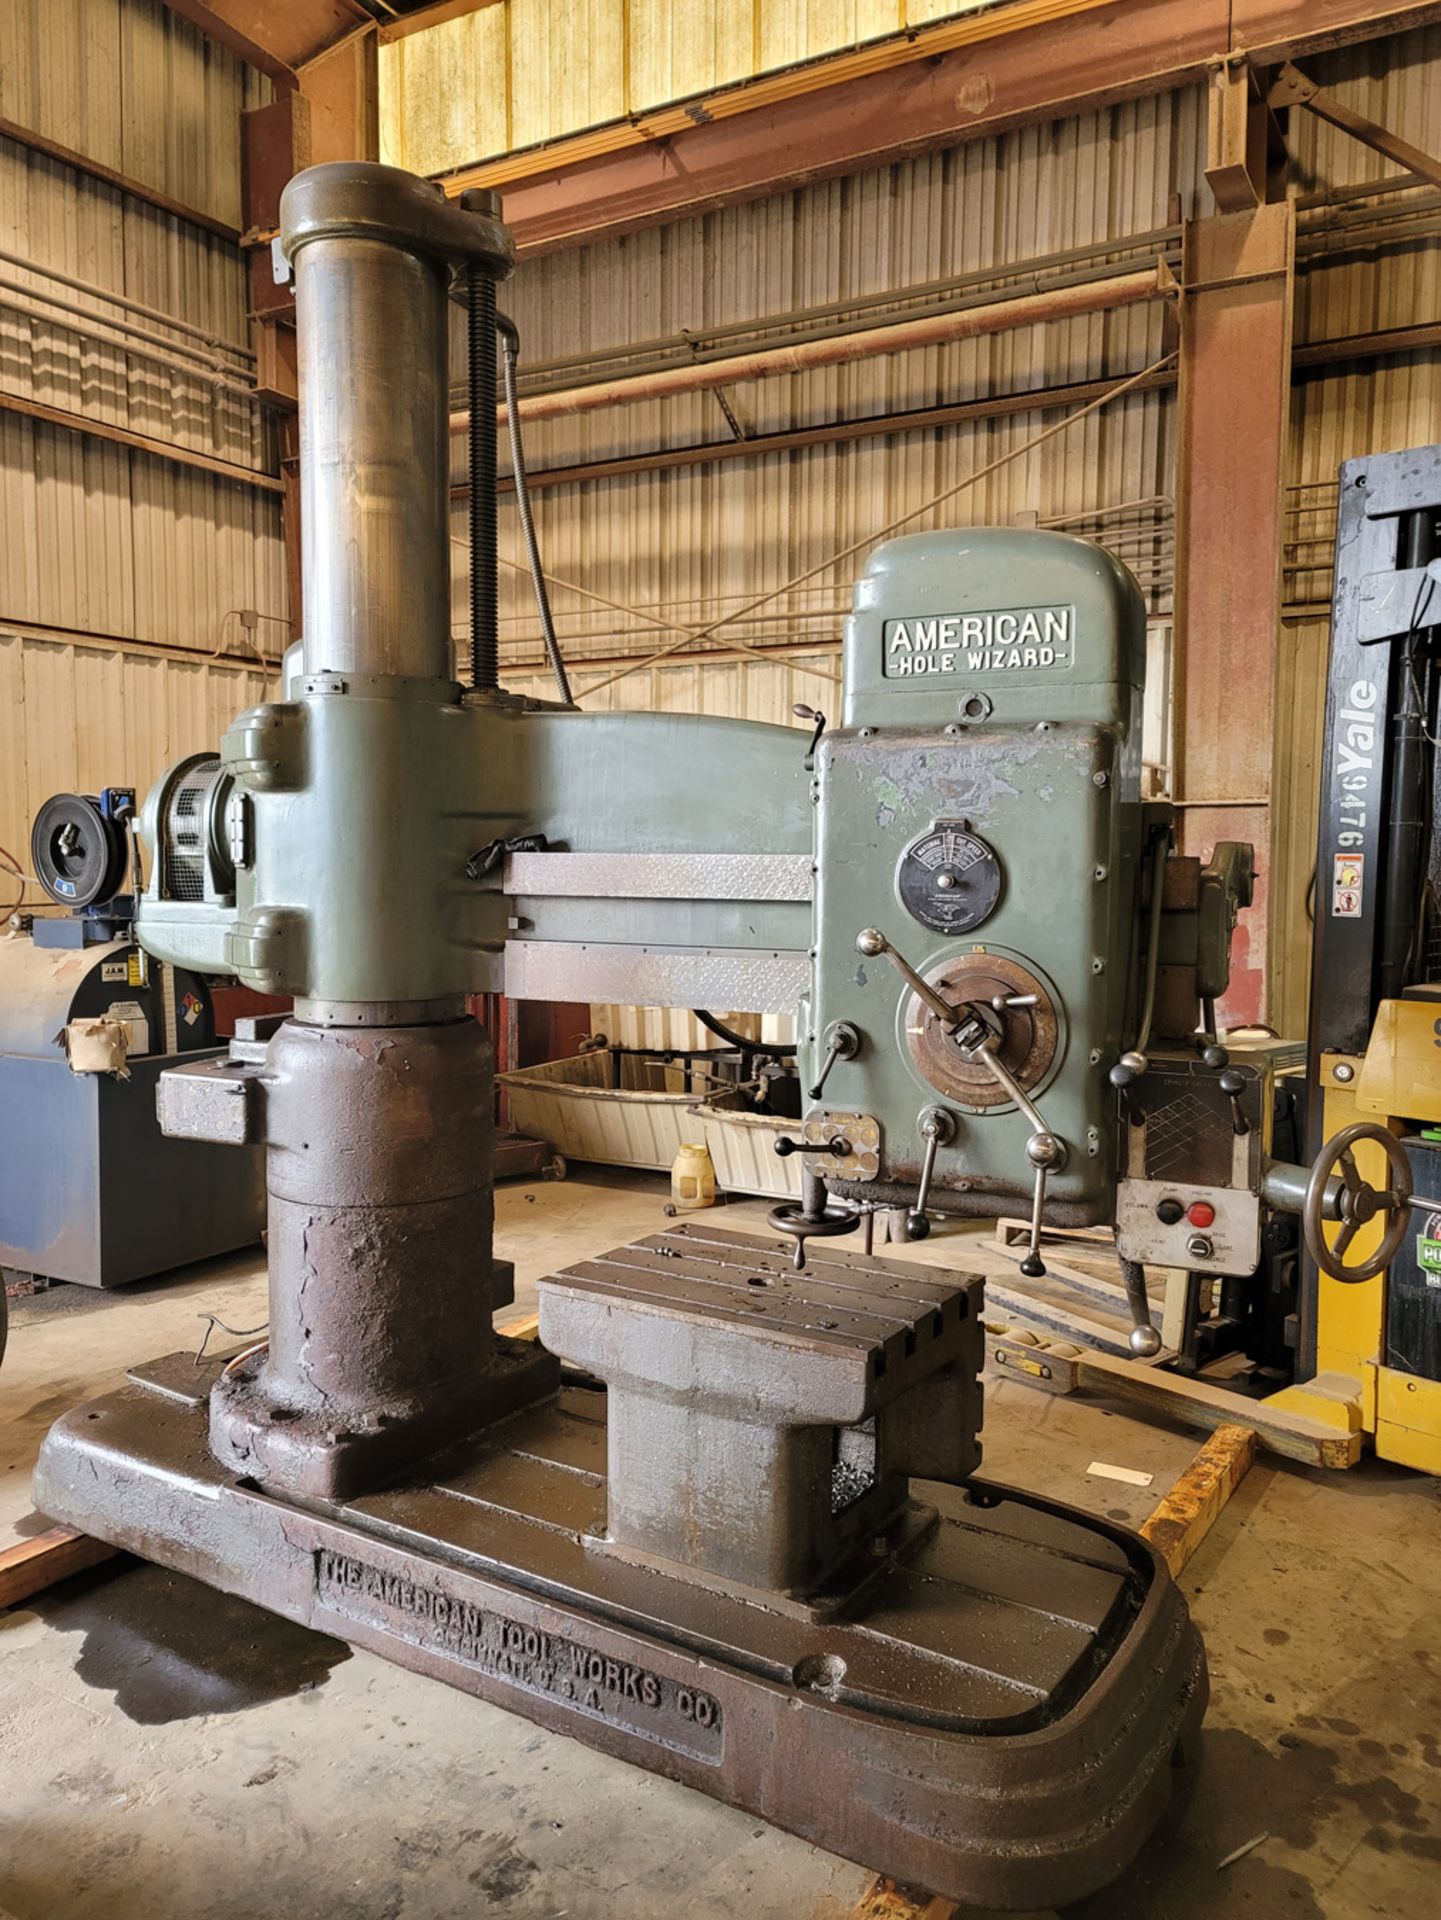 4' 13" American Hole Wizard Radial Drill